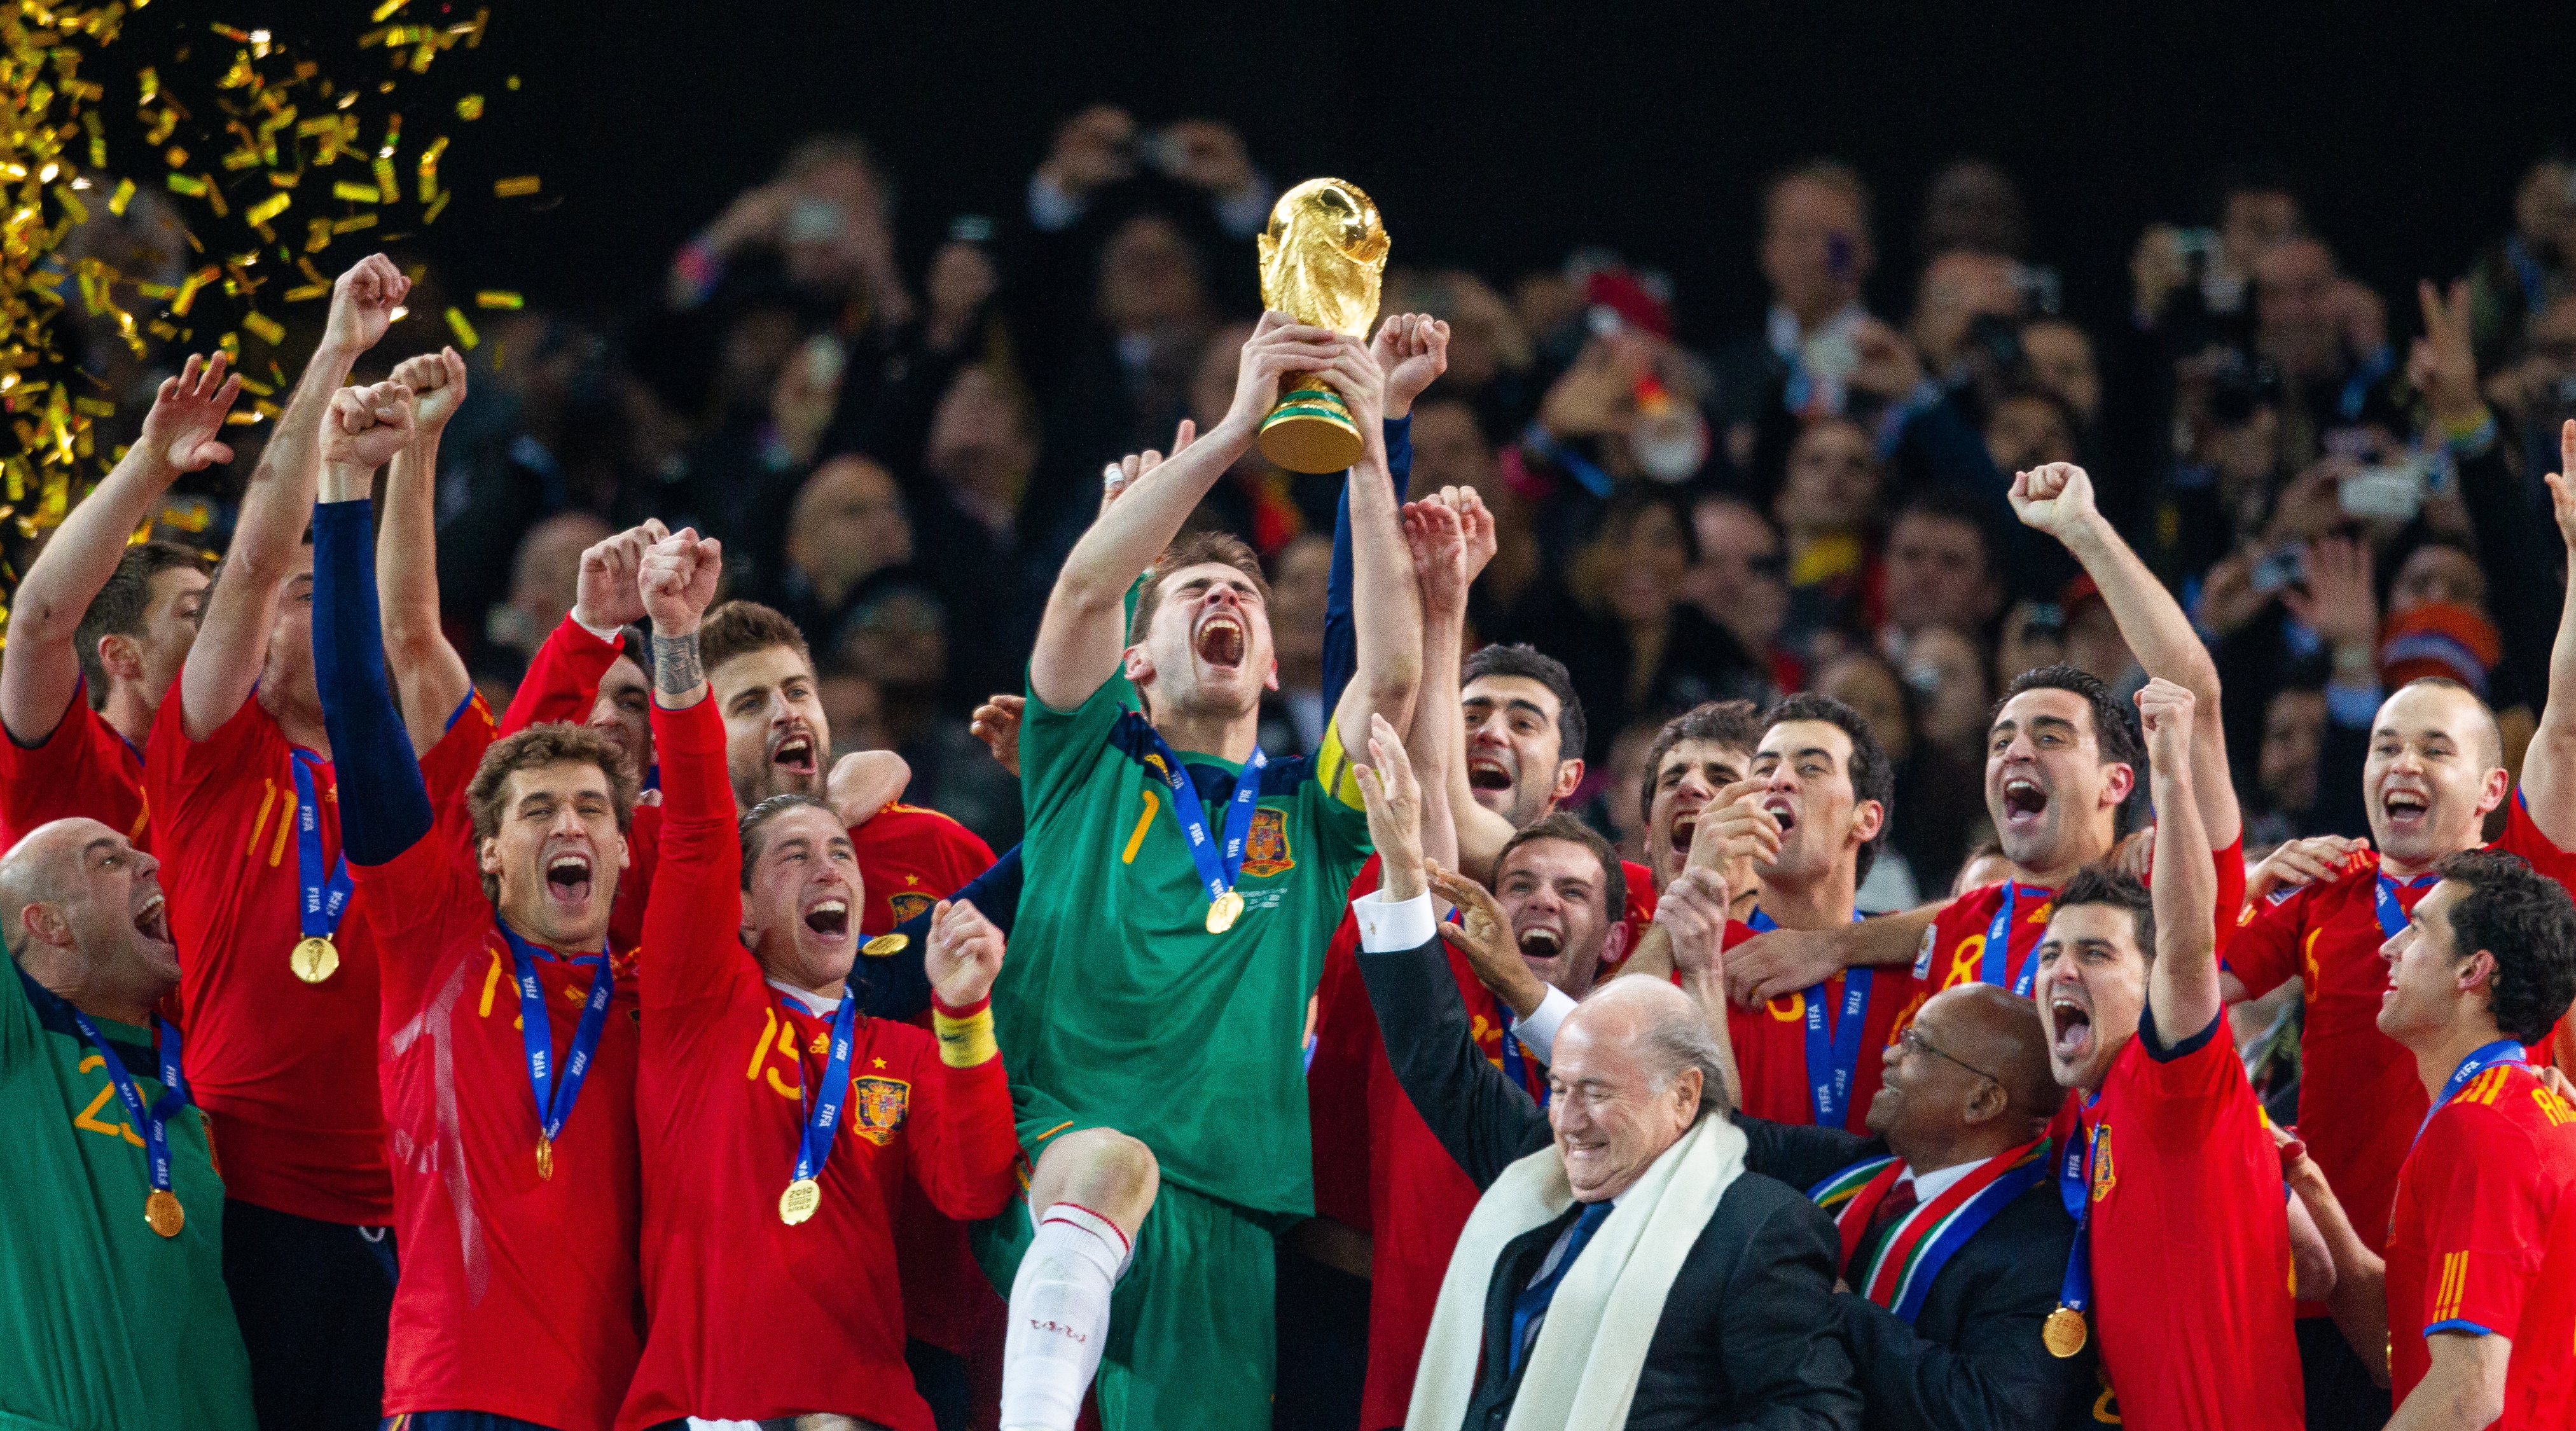 Spain goalkeeper and captain lifts the World Cup trophy after being handed it by Sepp Blatter, FIFA President and Jacob Zuma President of South Africa and surrounded by the Spanish team after victory in the World Cup Final match between Spain (1) and Netherlands (0) at the FNB Stadium on July 11, 2010 in Johannesburg, South Africa